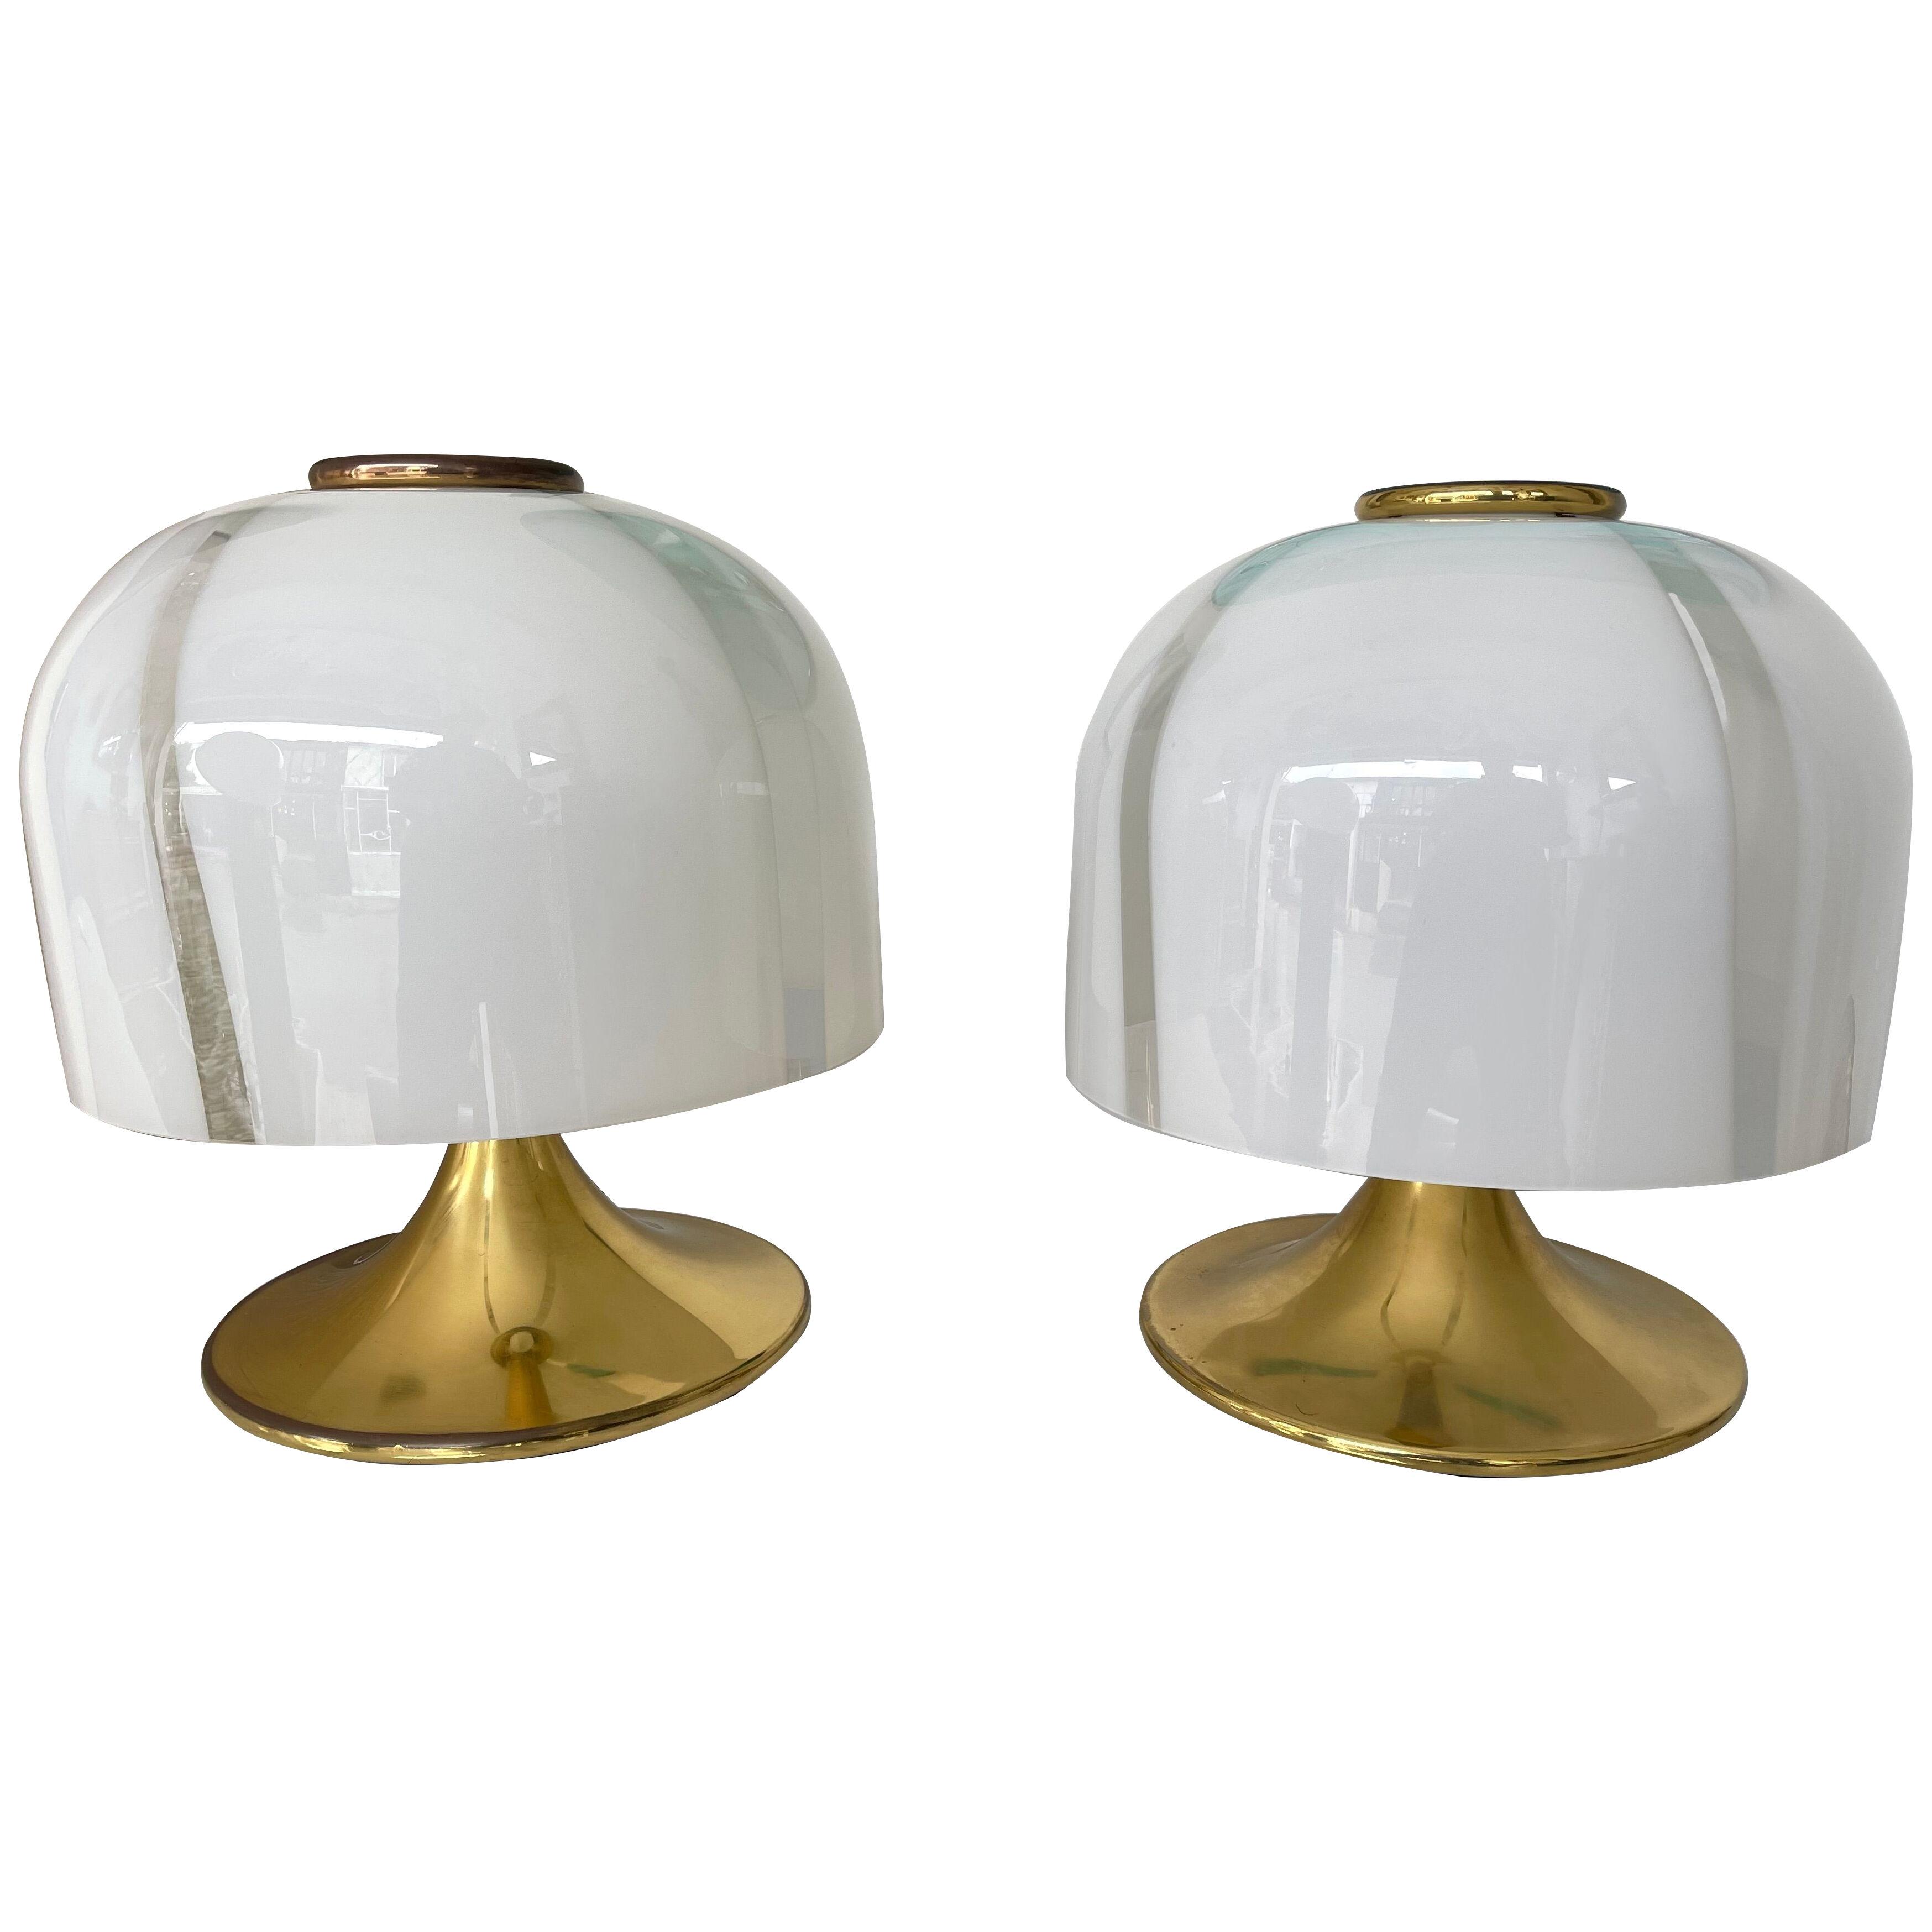 Pair of Mushroom Lamps Brass and Murano Glass by F. Fabbian, Italy, 1970s